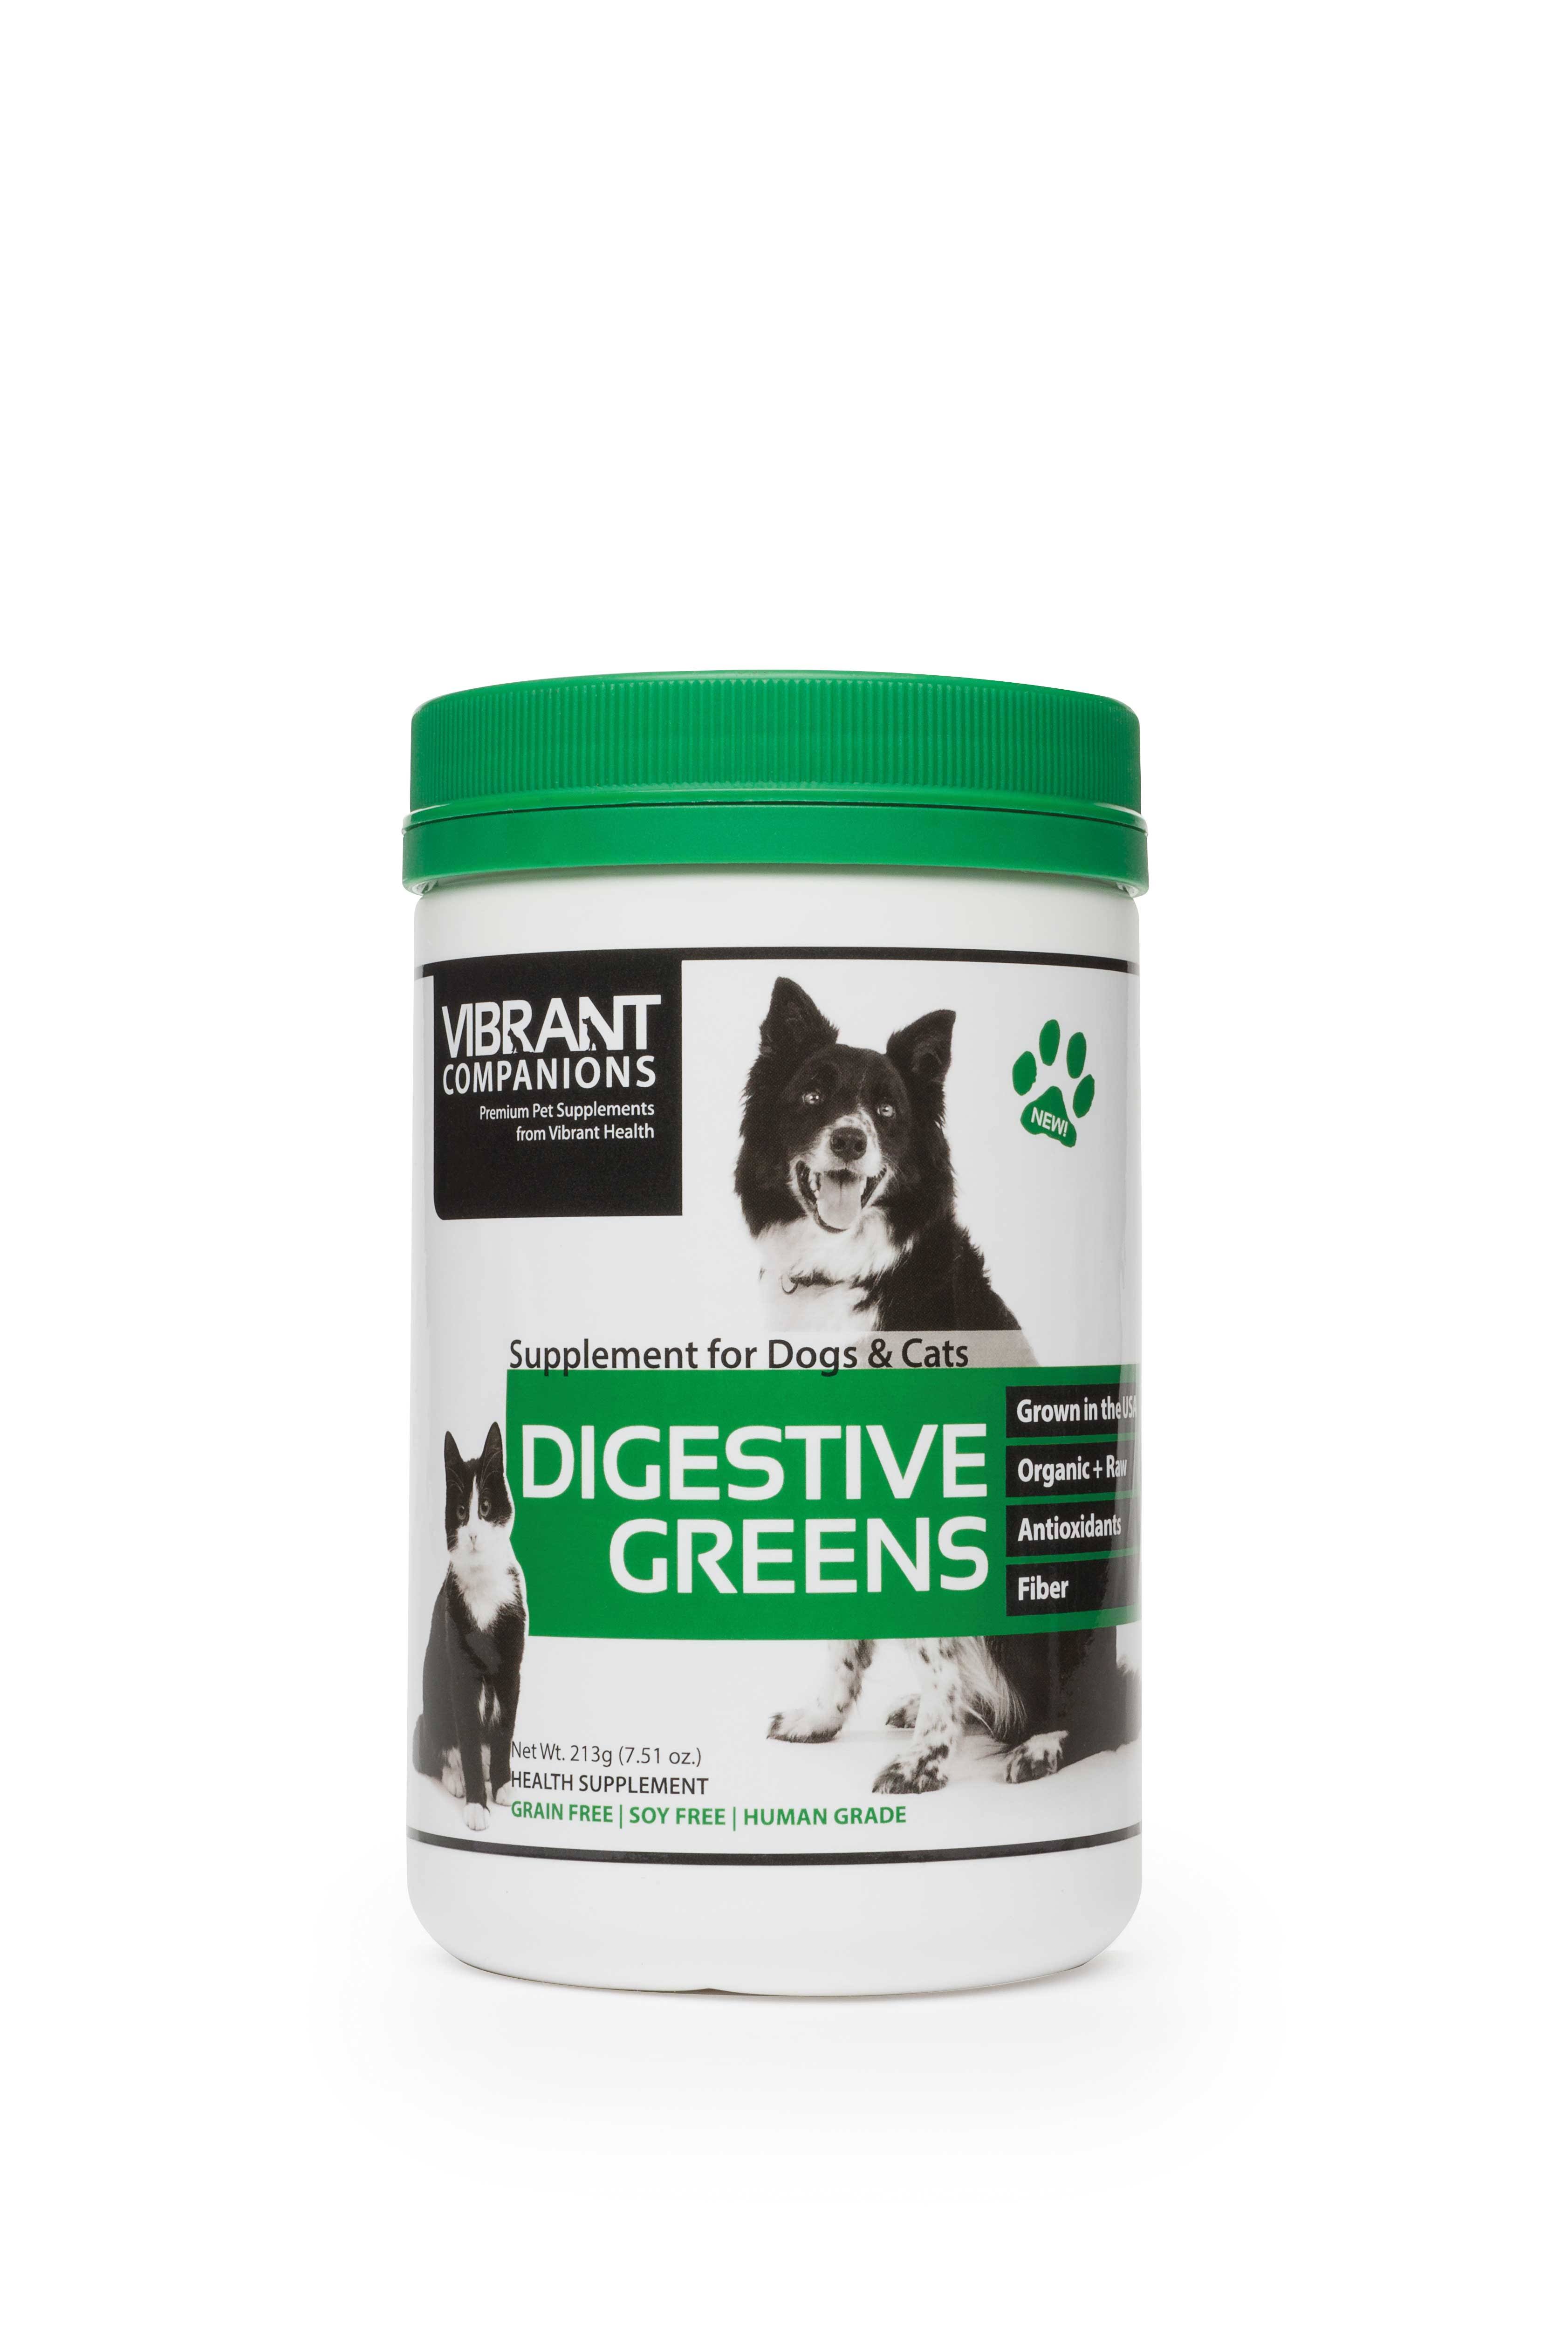 Vibrant Health Digestive Greens Supplement - for Dogs & Cats, 7.51oz